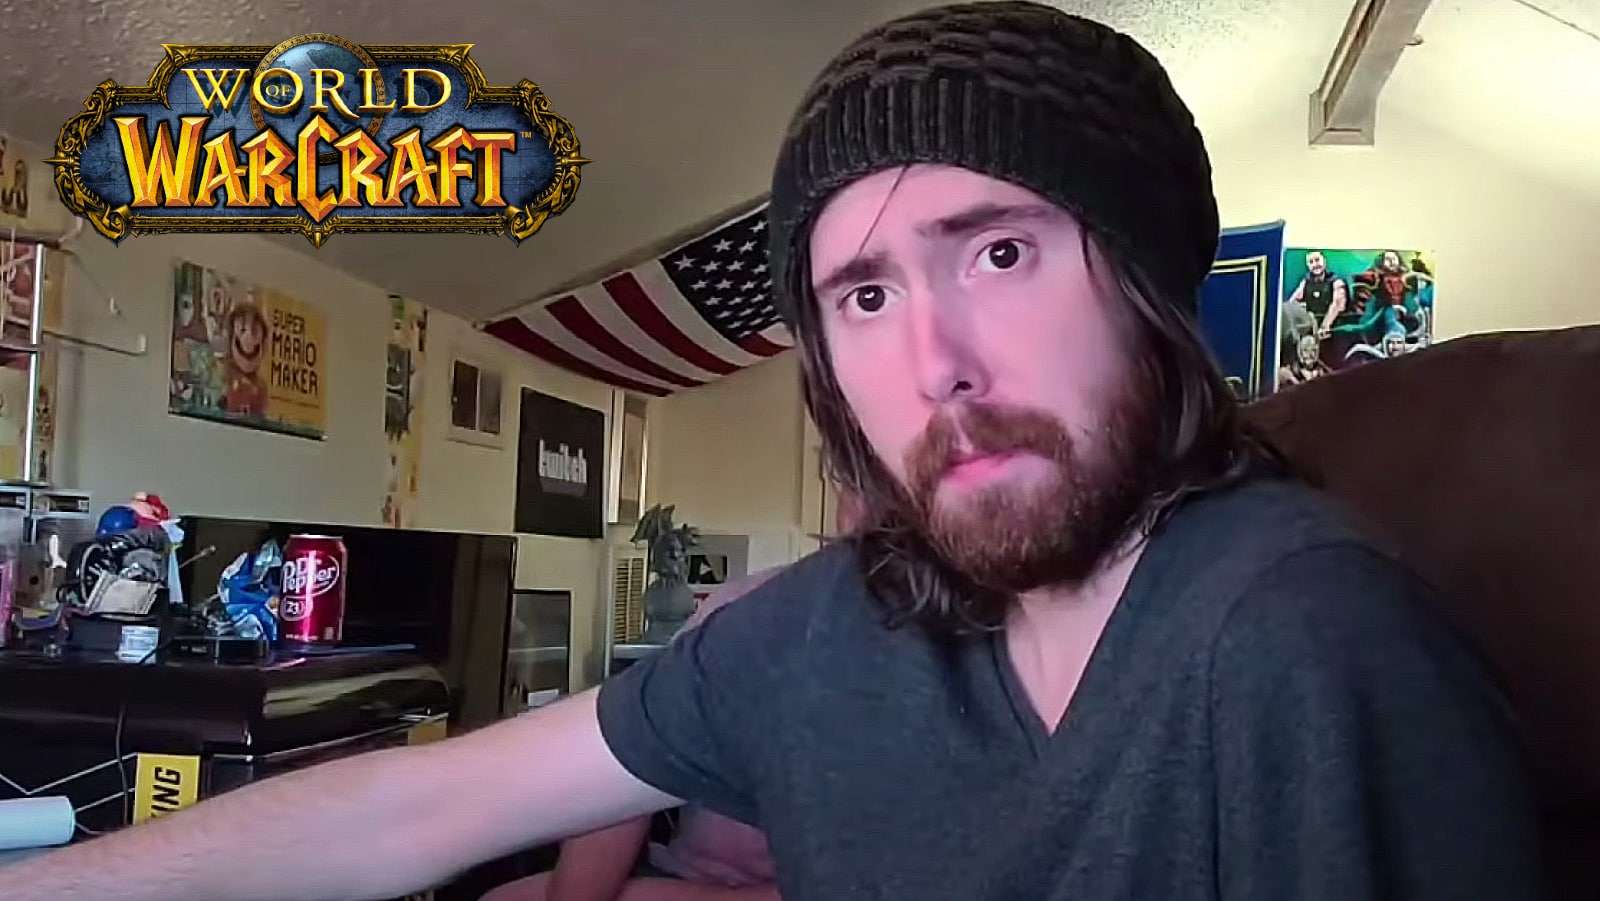 twitch streamer asmongold read his wow community council response from Blizzard out lout